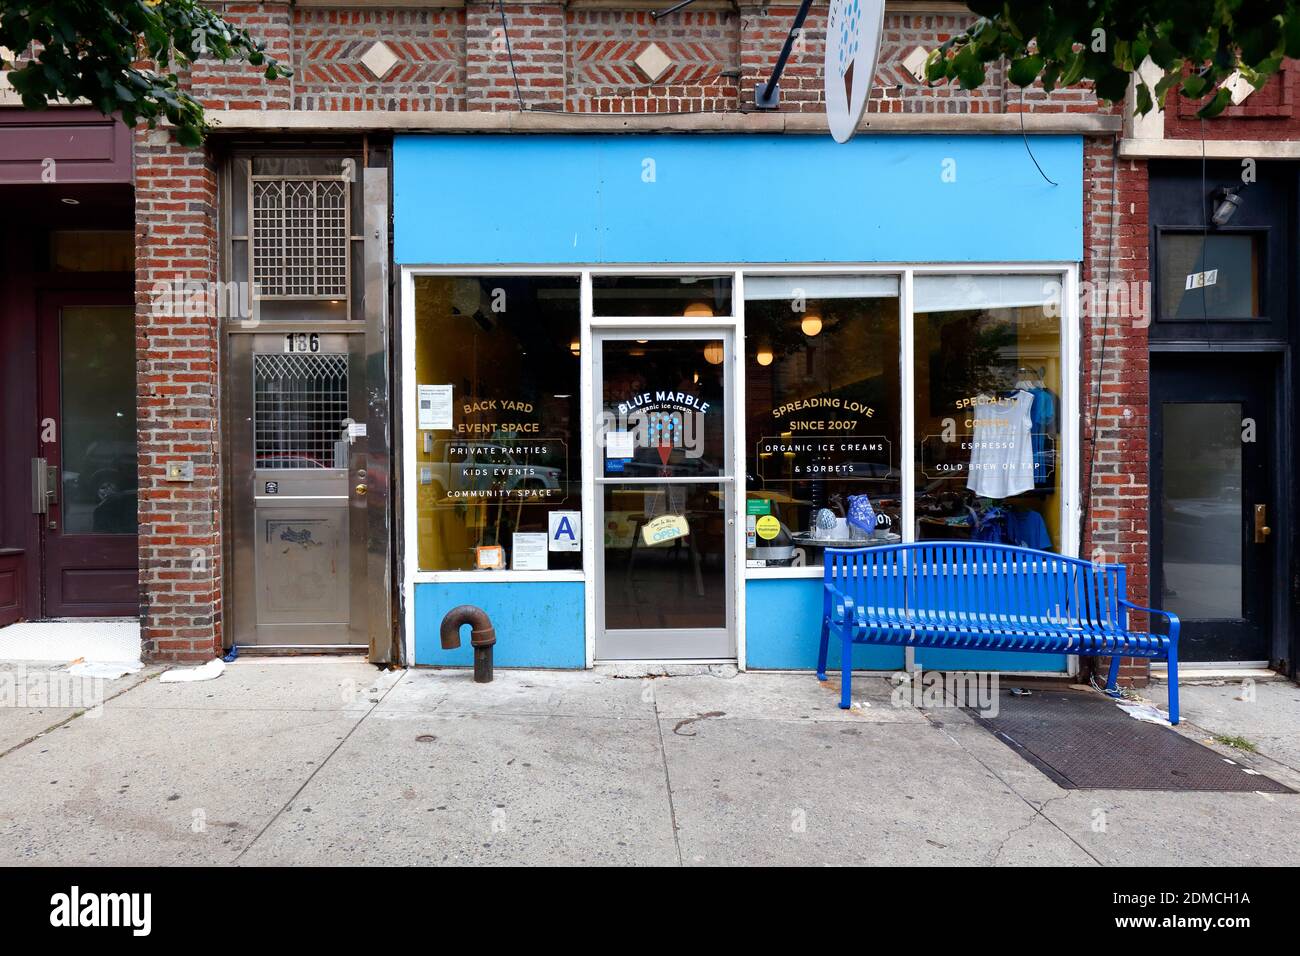 Blue Marble Ice Cream, 186 Underhill Ave, Brooklyn, New York. NYC storefront photo of an ice cream shop in the Prospect Heights neighborhood. Stock Photo